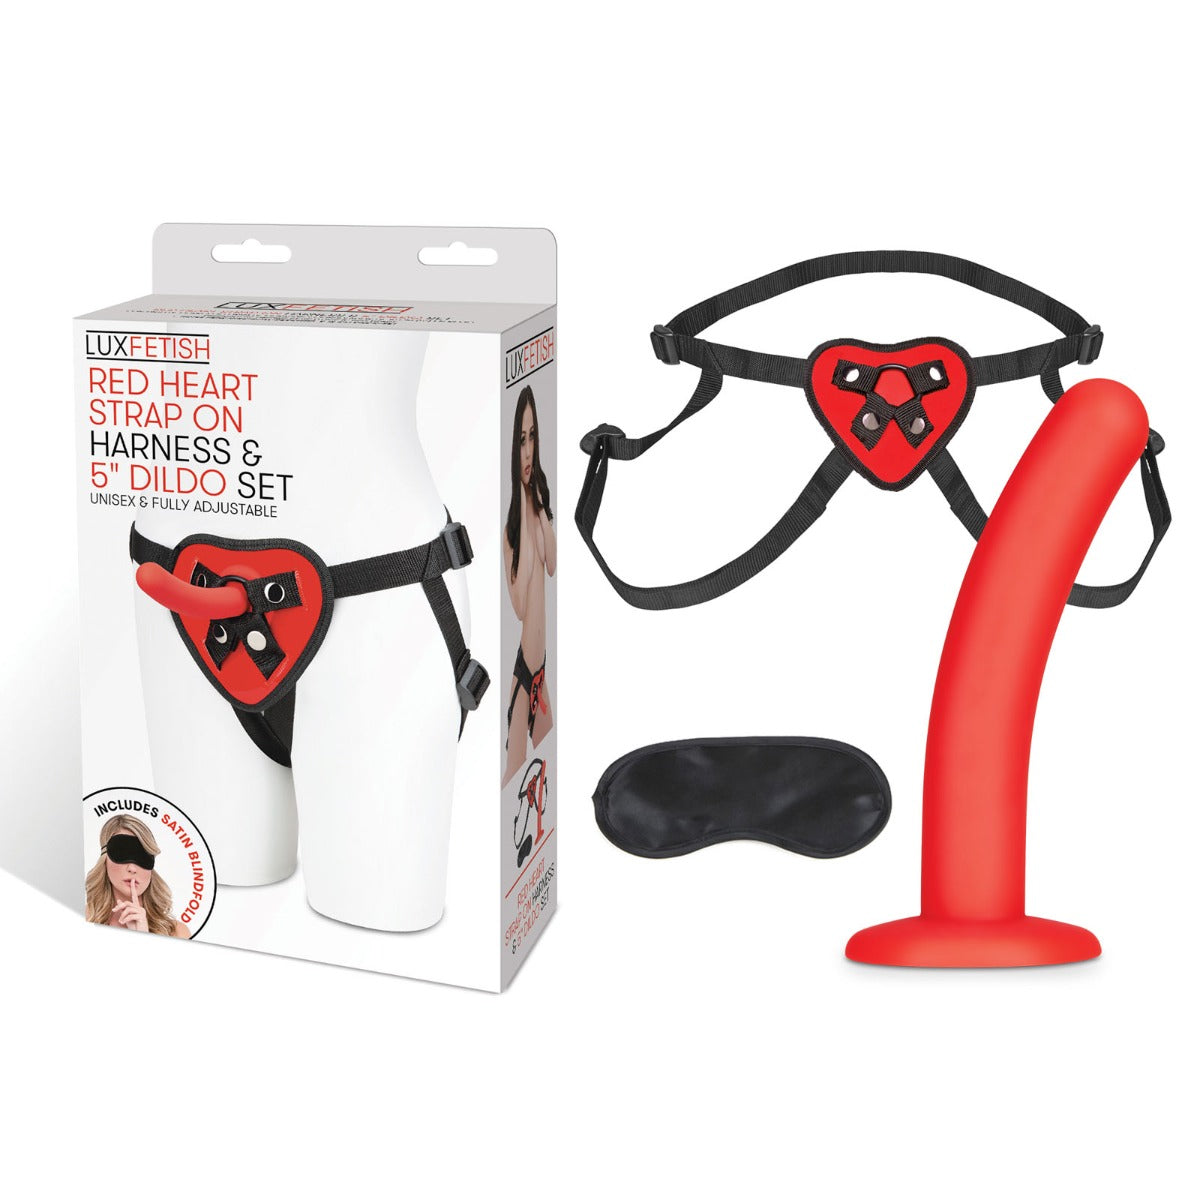 Strap On Harness RED HEART STRAP ON HARNESS & 5"" DILDO SET""   